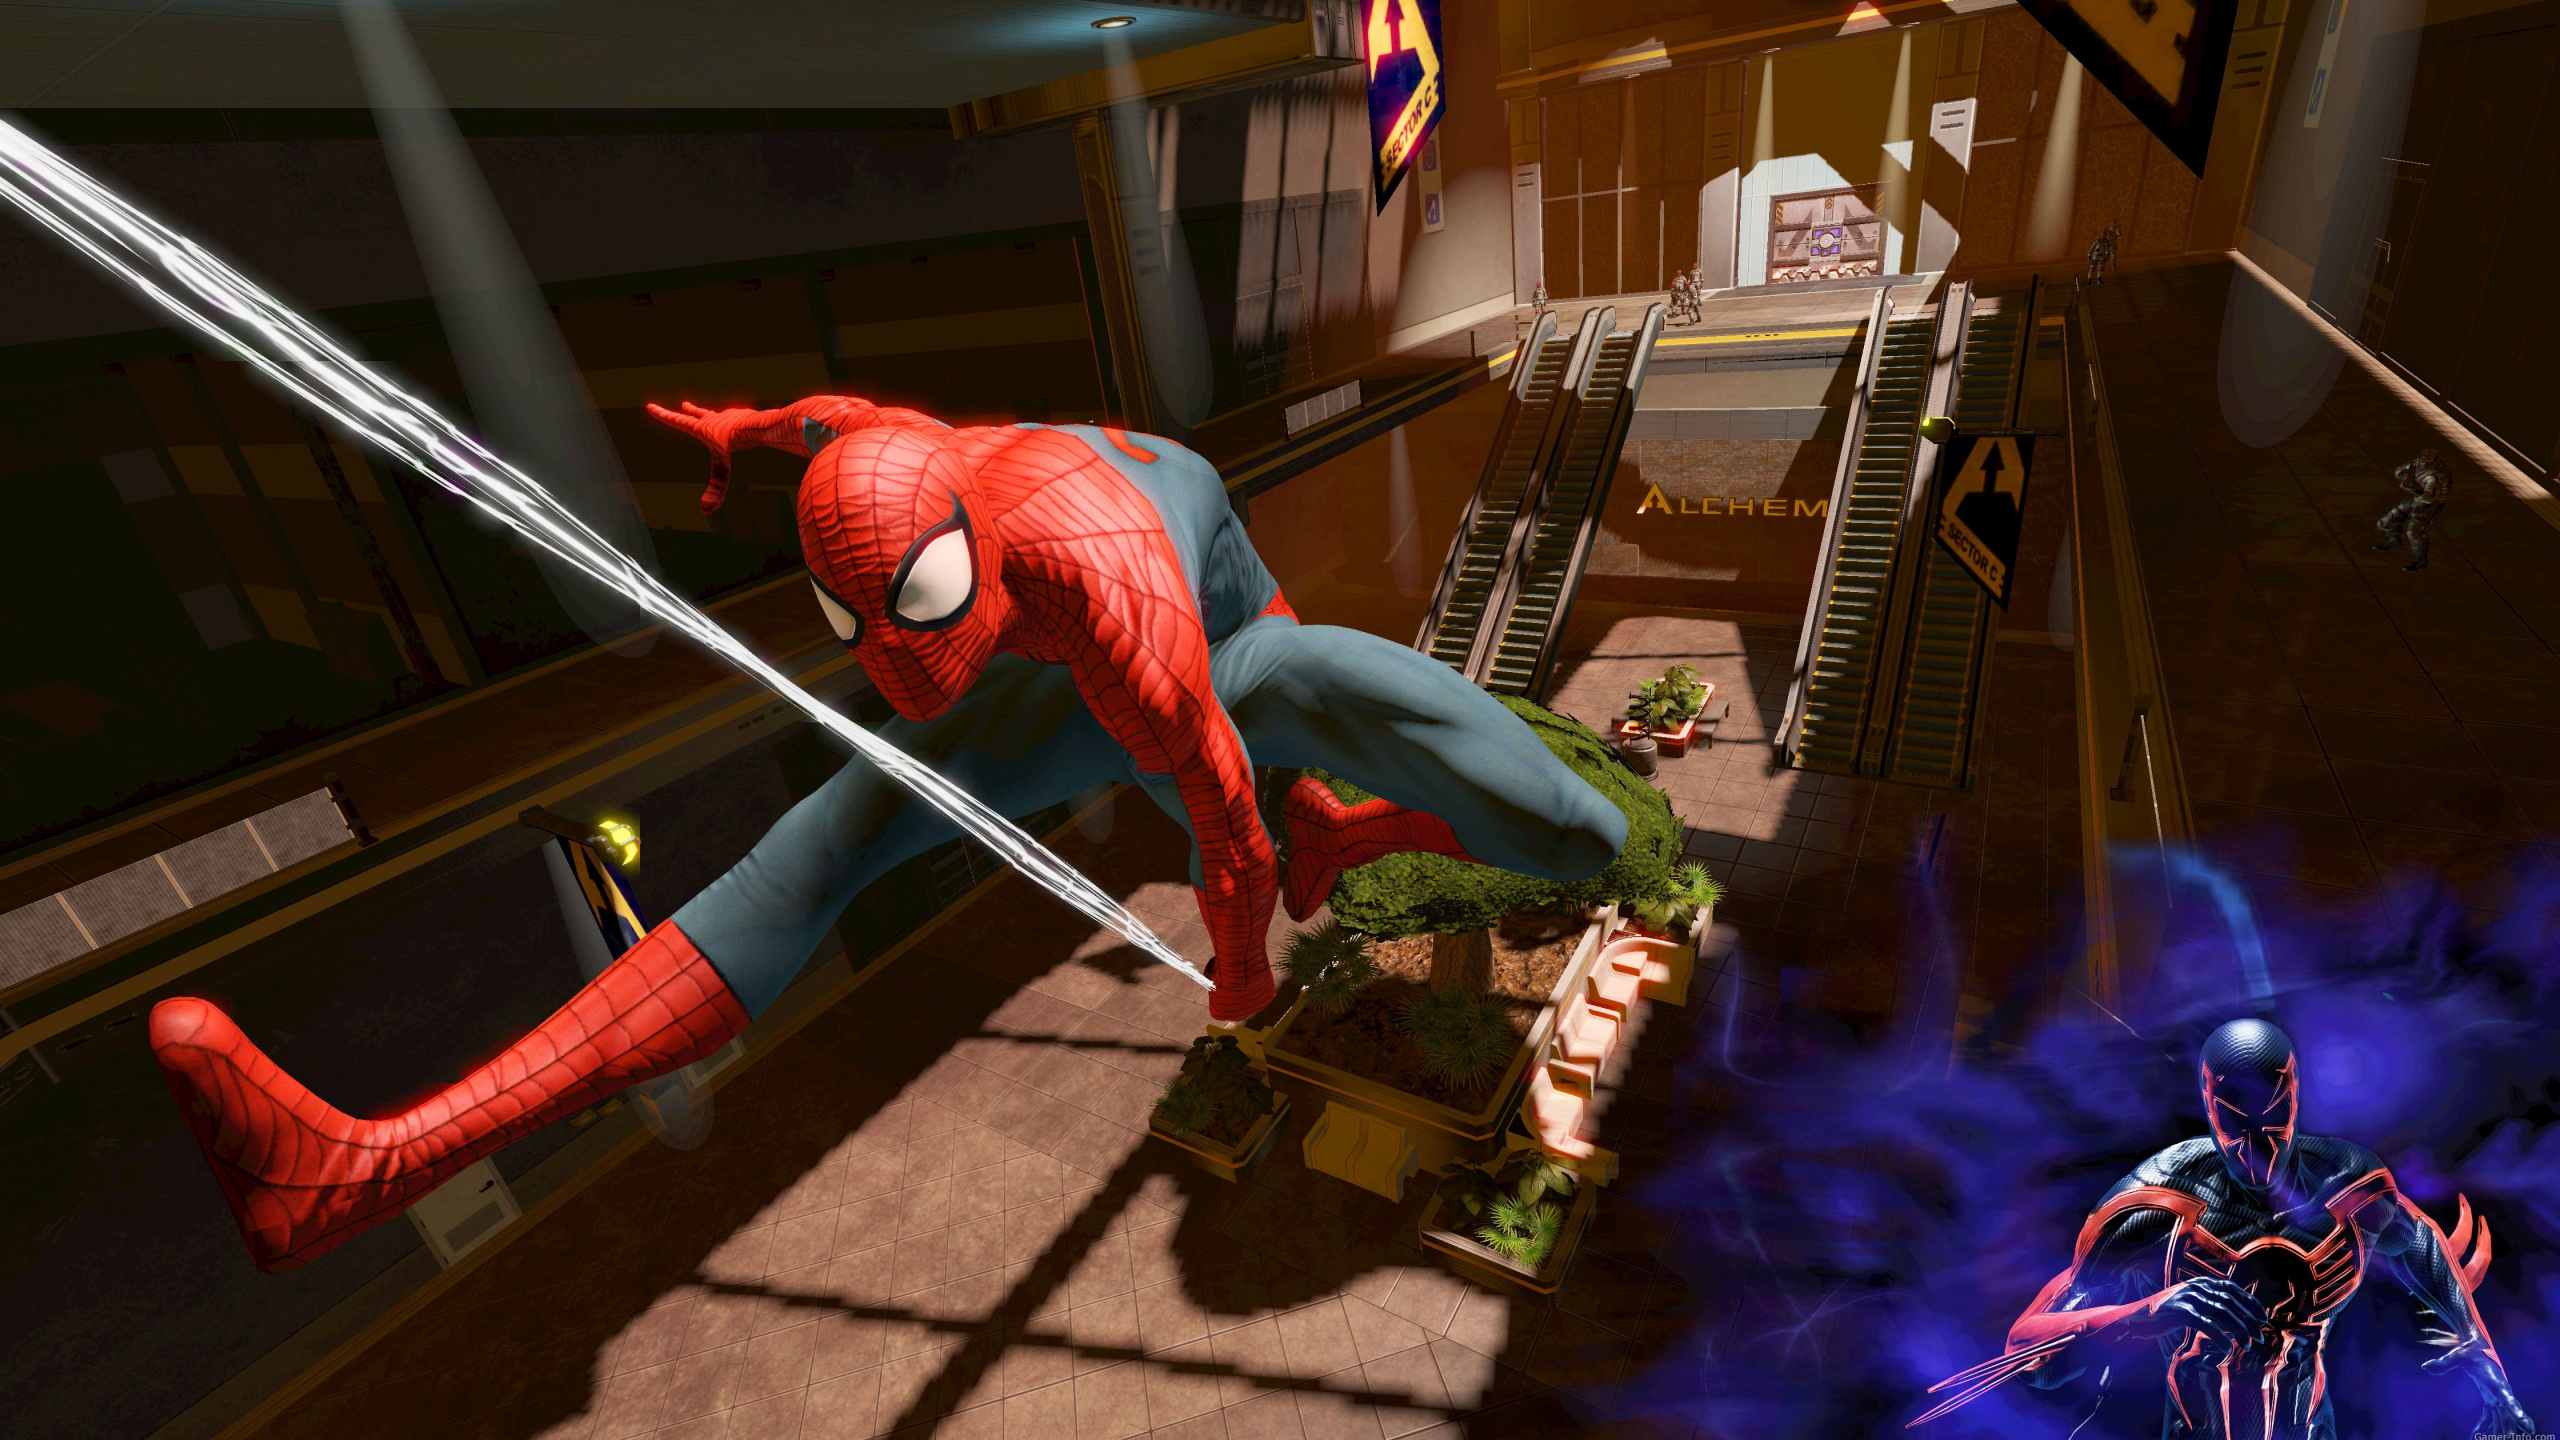 Spider-Man Edge of Time, Spider-man, Spider-Man Shattered Dimensions, Beenox, Activision. Wallpaper in 2560x1440 Resolution